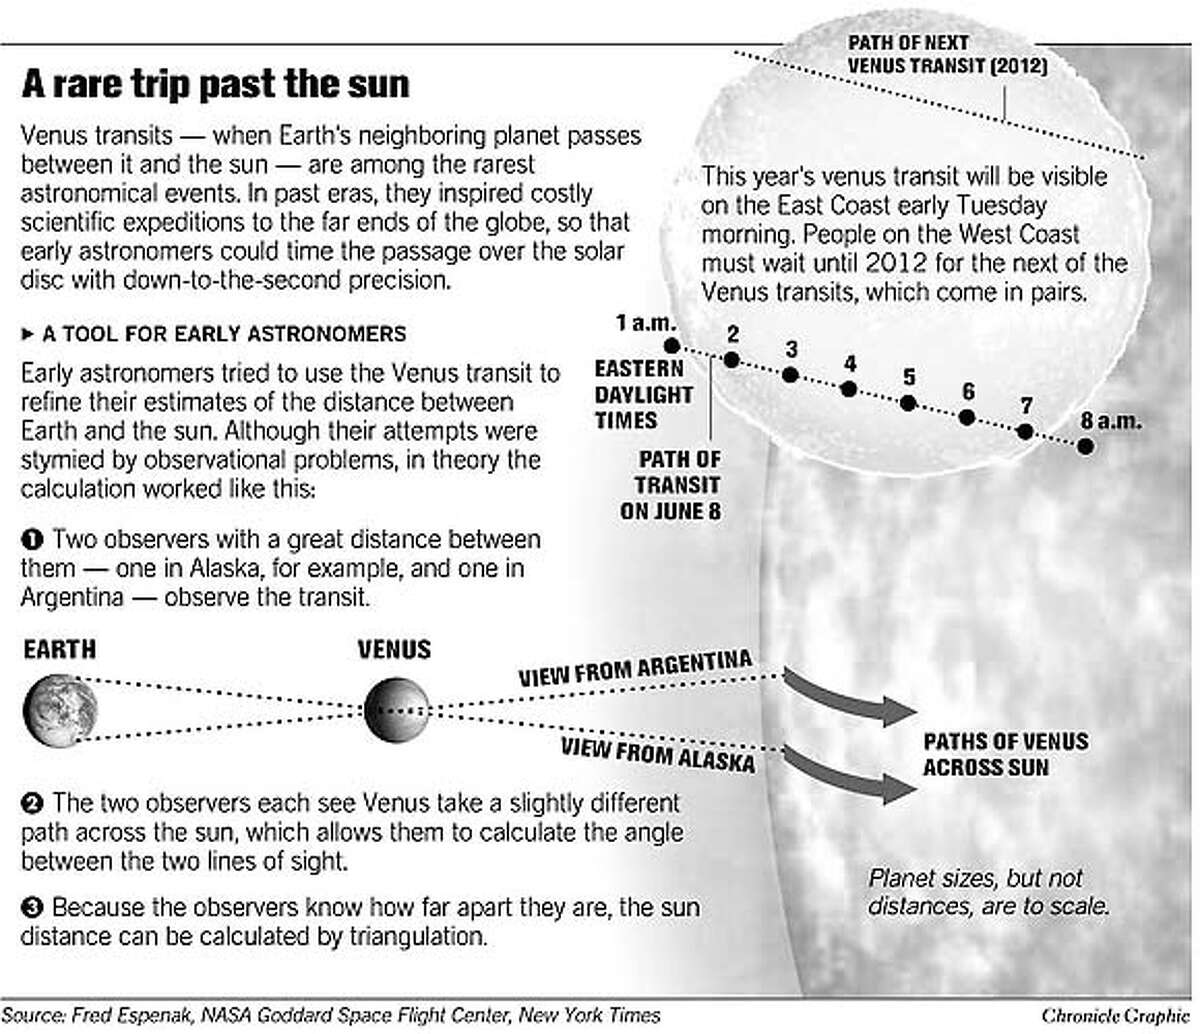 A Rare Trip Past the Sun. Chronicle Graphic